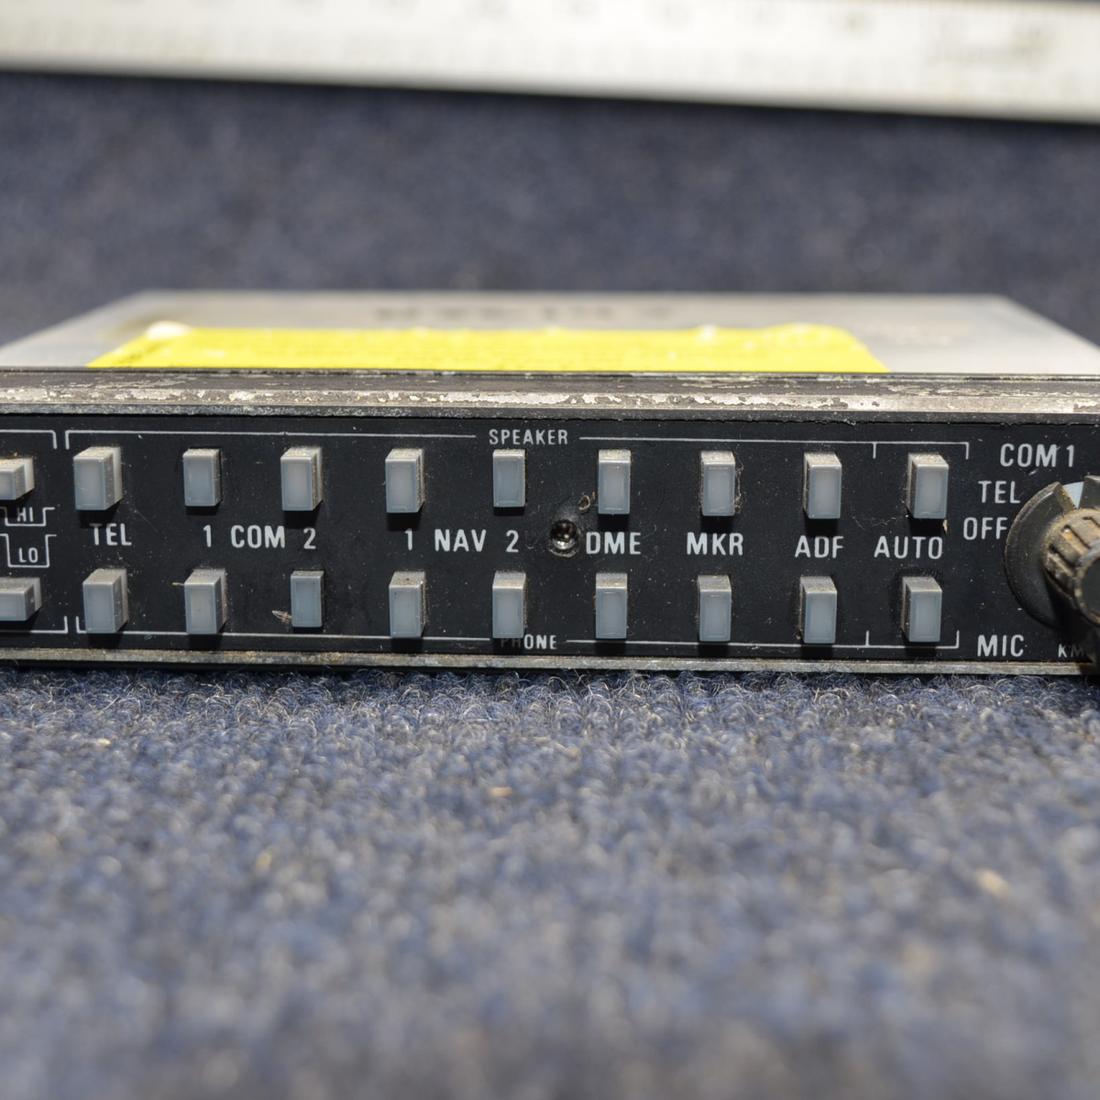 Used aircraft parts for sale, 066-1055-03 Cessna C175 KMA 24 BENDIX KING AUDIO PANEL NO RACK NO CONNECTOR